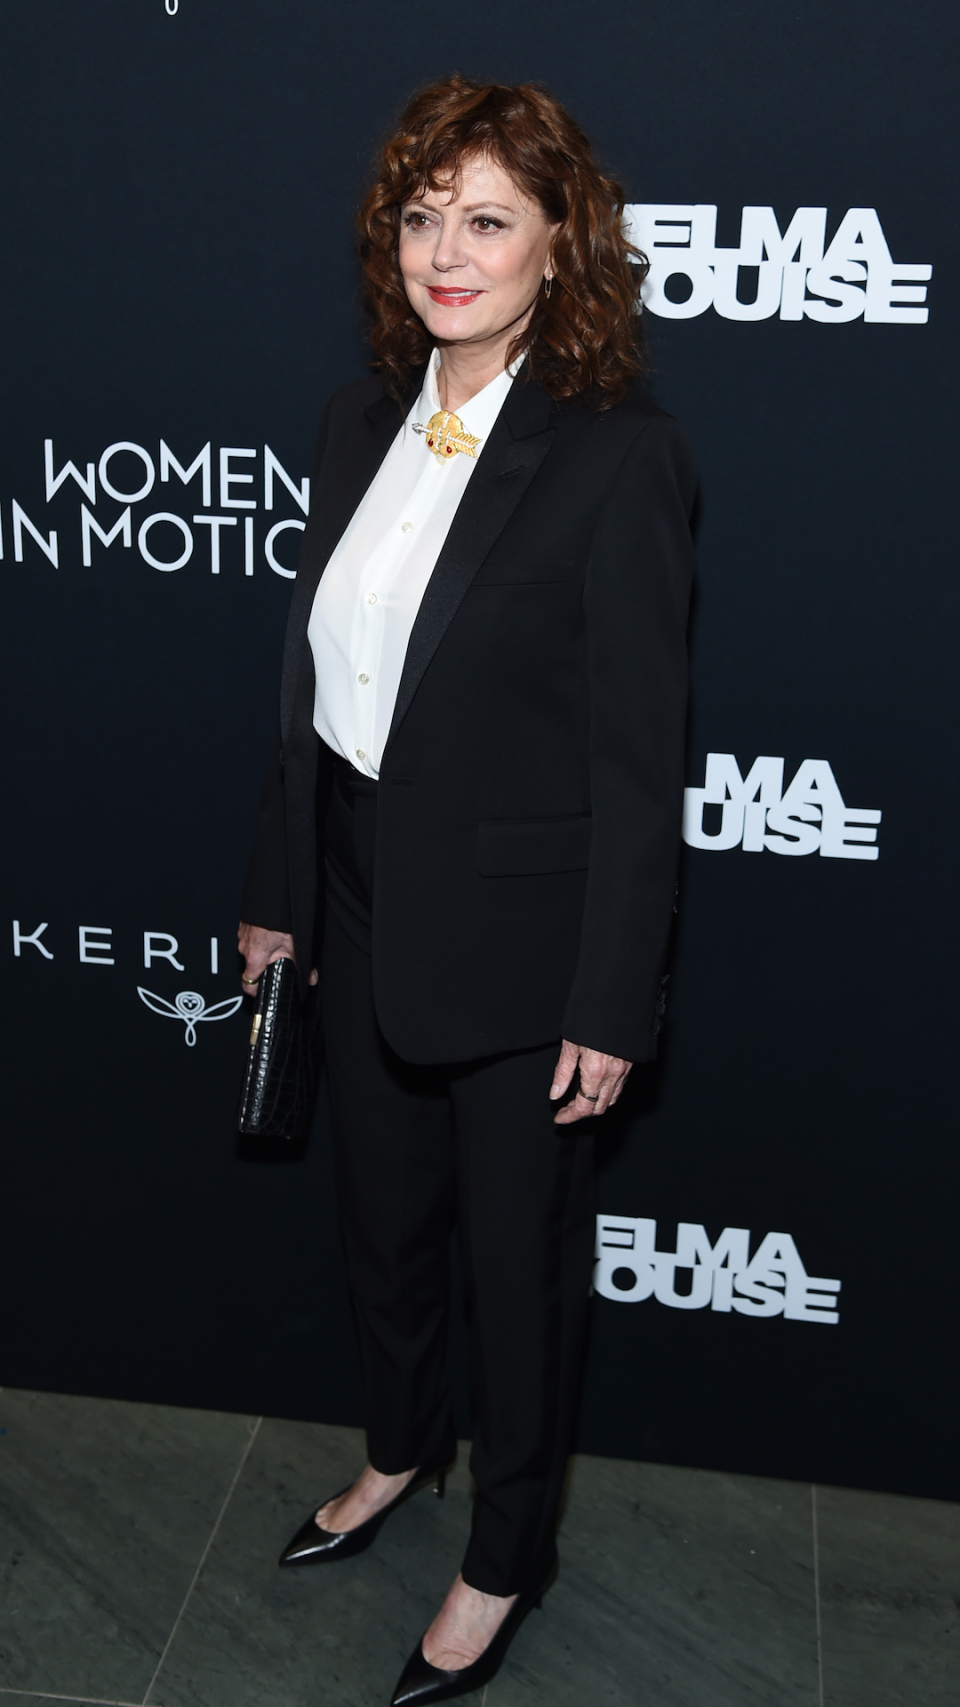 <p> Sarandon was the epitome of elegance at a screening of Thelma & Louise in New York in 2020. The actress wore a chic black trouser suit, paired with a buttoned-up white blouse. She finished off the tailored look with a red lip, chunky gold necklace, black clutch bag and black kitten heels. </p>